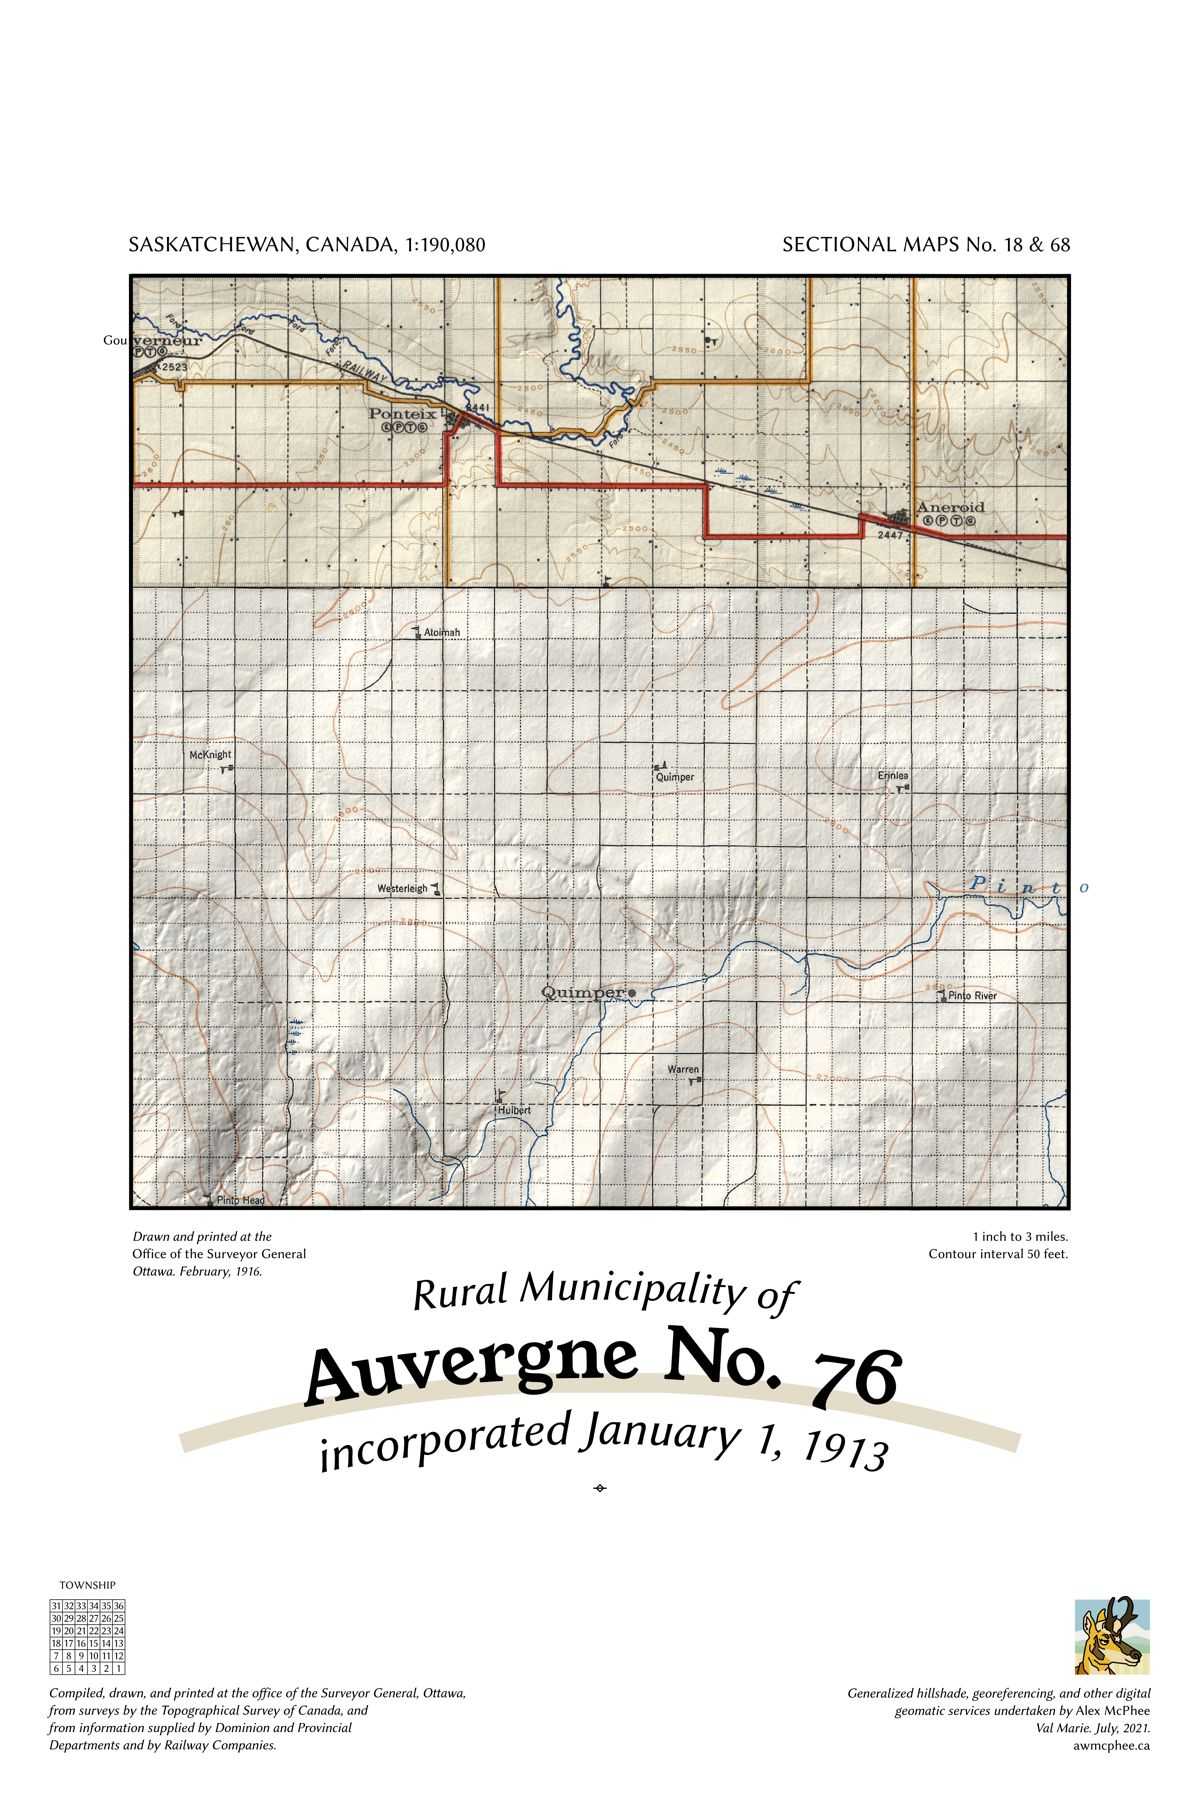 A map of the Rural Municipality of Auvergne No. 76.